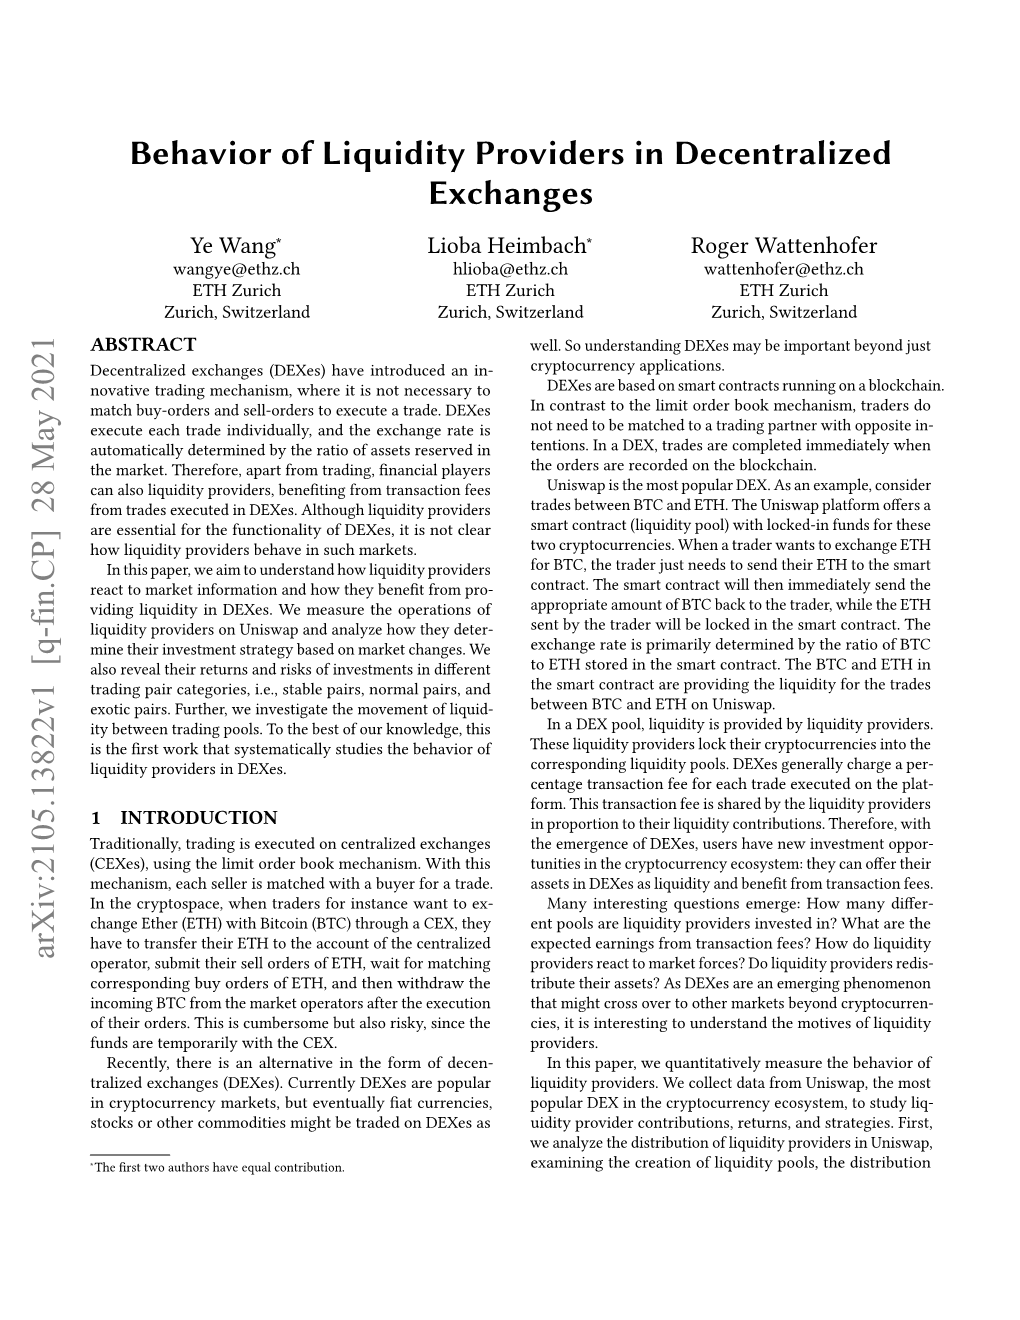 Behavior of Liquidity Providers in Decentralized Exchanges Arxiv:2105.13822V1 [Q-Fin.CP] 28 May 2021